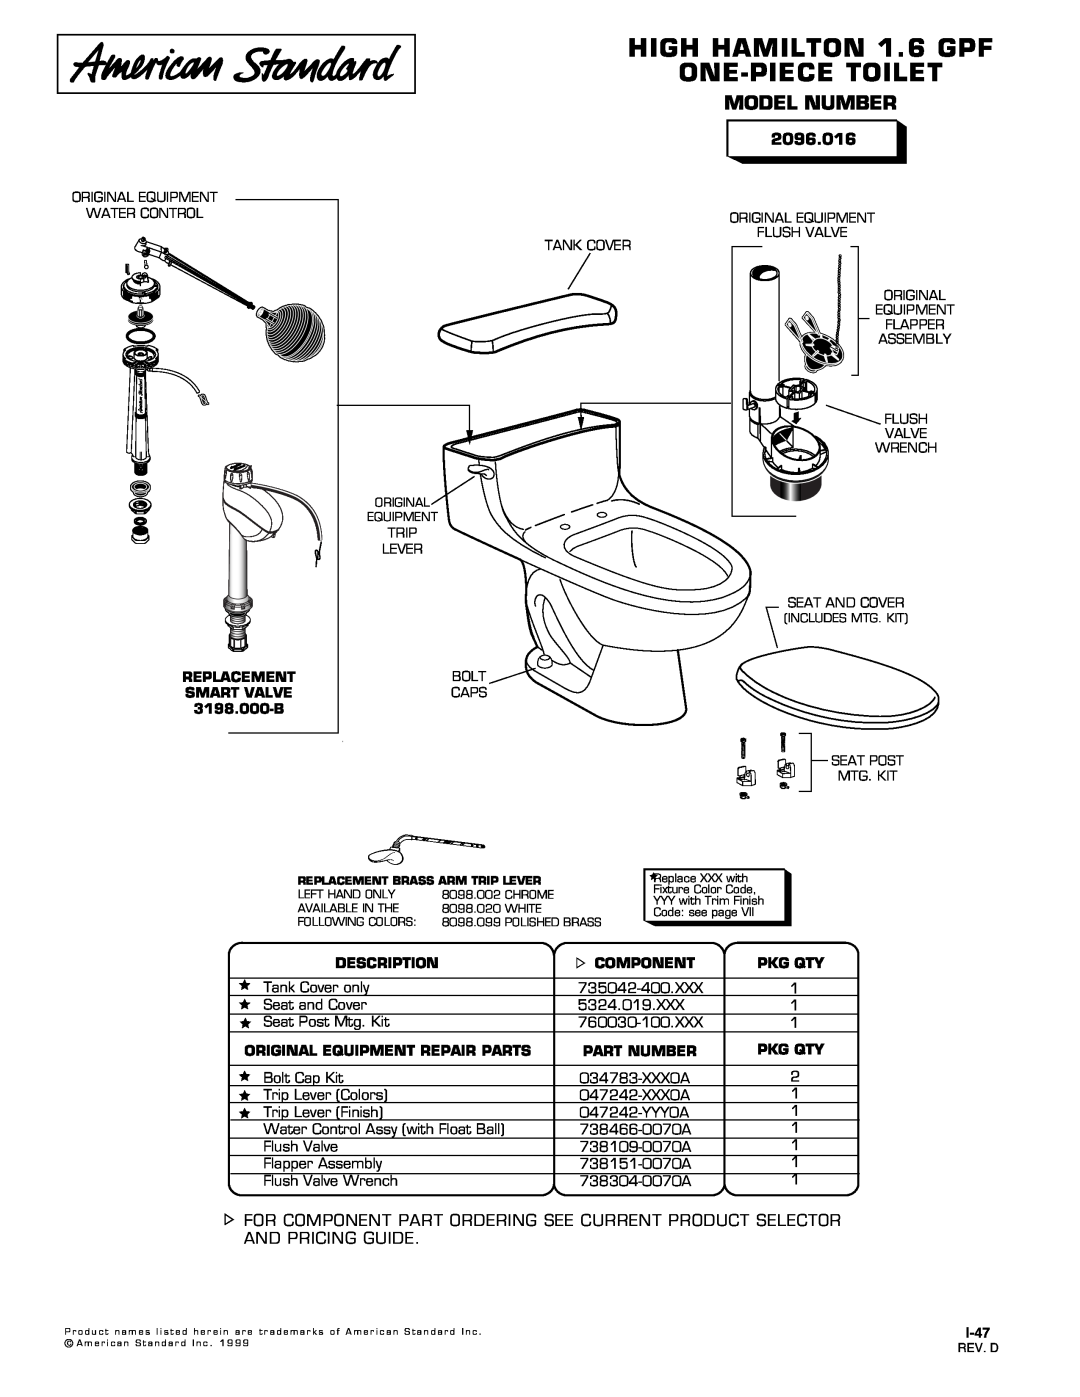 American Standard 2096.016 manual HIGH HAMILTON 1.6 GPF, One-Piecetoilet, Model Number, Replacement, Smart Valve, Pkg Qty 